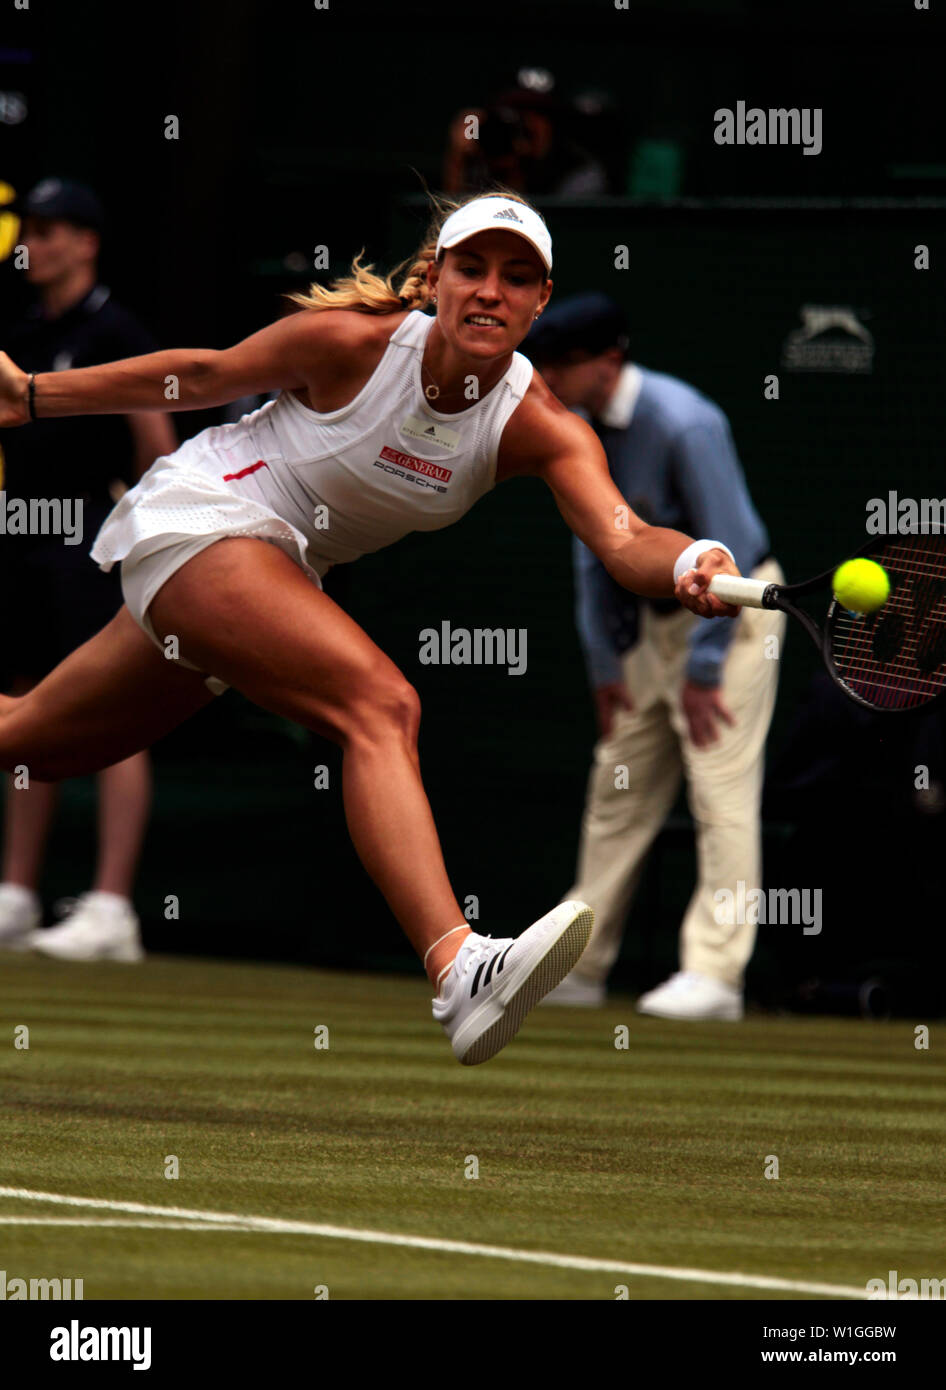 Wimbledon, 2 July 2019 - Germany's Angelique Kerber during her first round  victory over countrywoman Tatjana Maria on Centre Court at Wimbledon today.  Credit: Adam Stoltman/Alamy Live News Stock Photo - Alamy